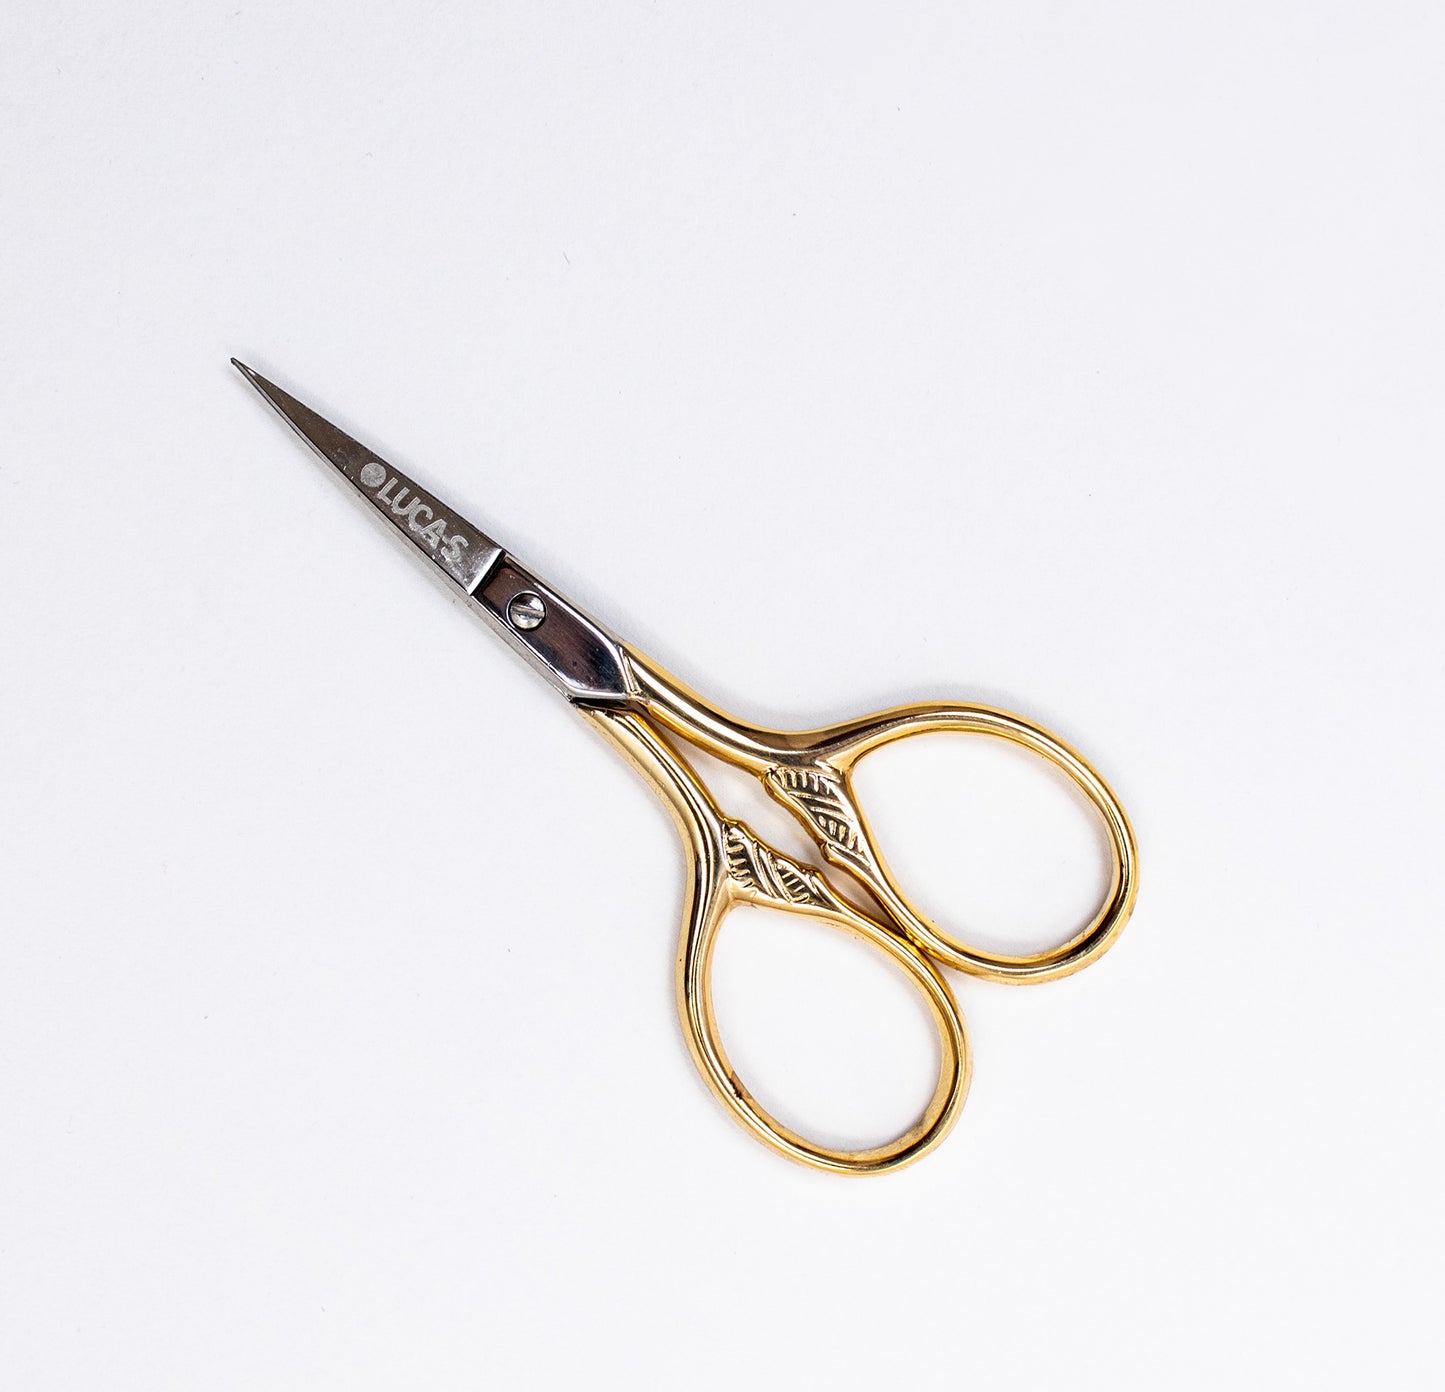 Embroidery Scissors Luca-S - EMBROIDERY SCISSORS GOLD